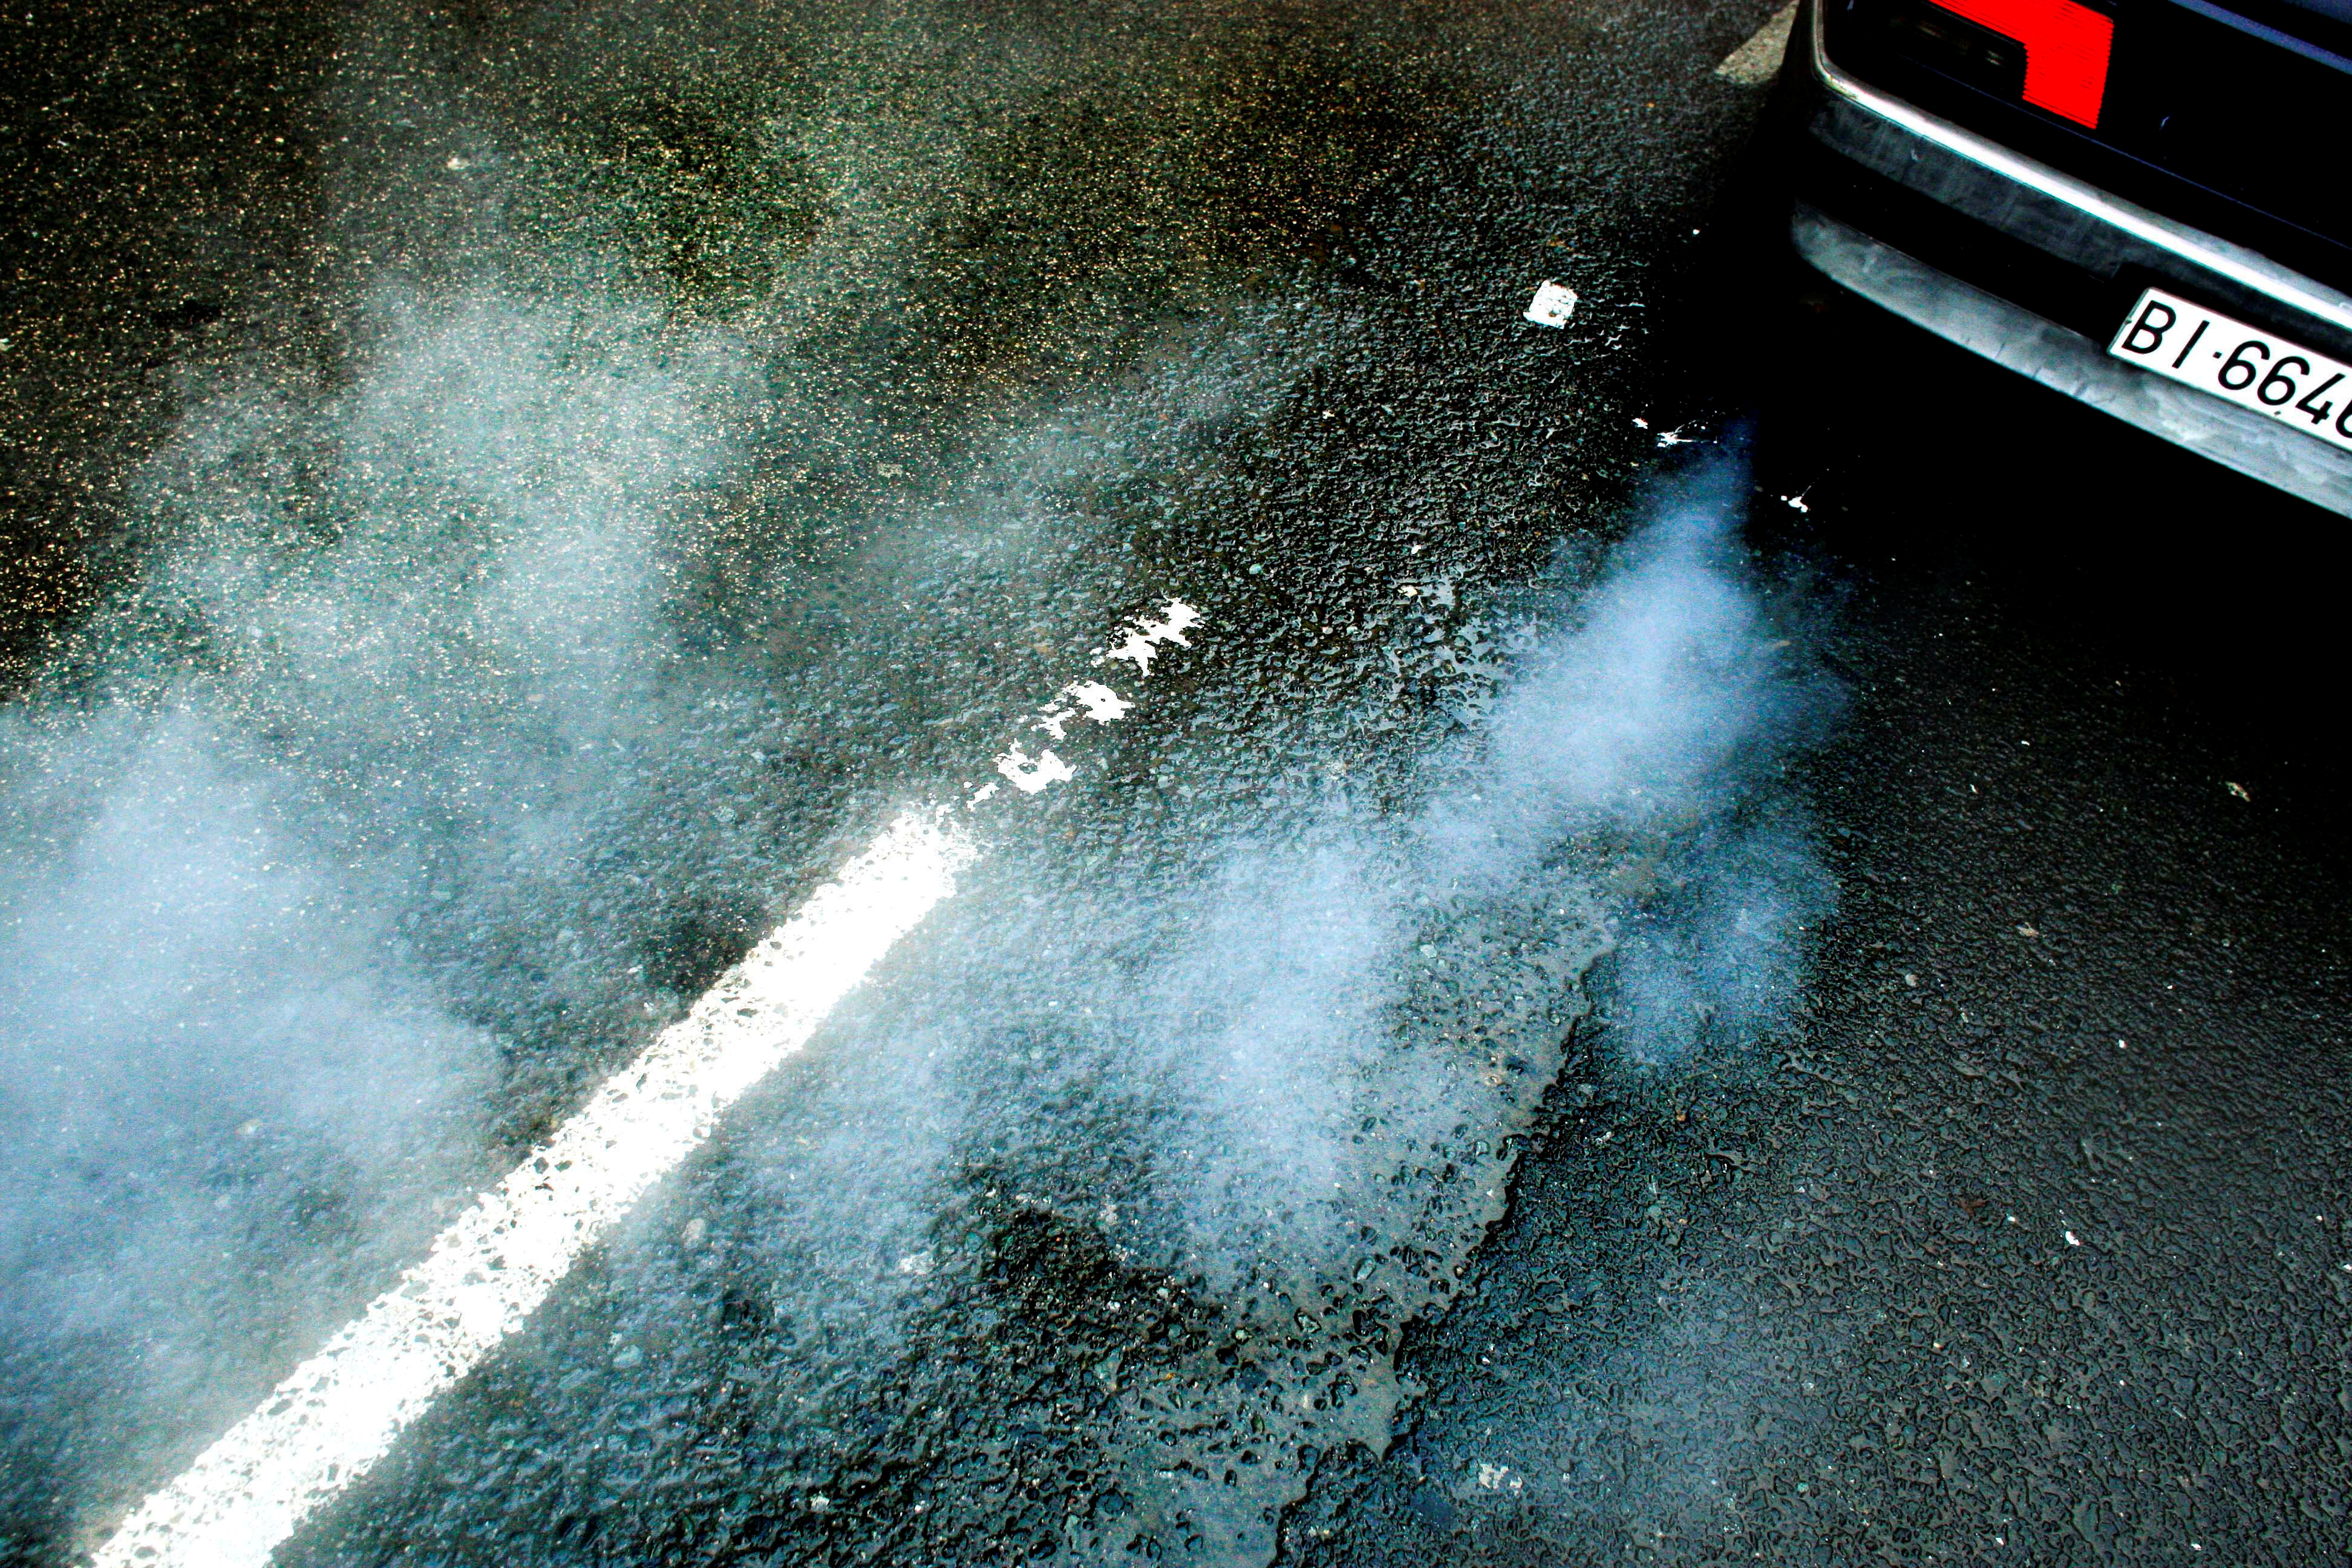 A car produces smoke from its exhaust as it pulls away in Guernica